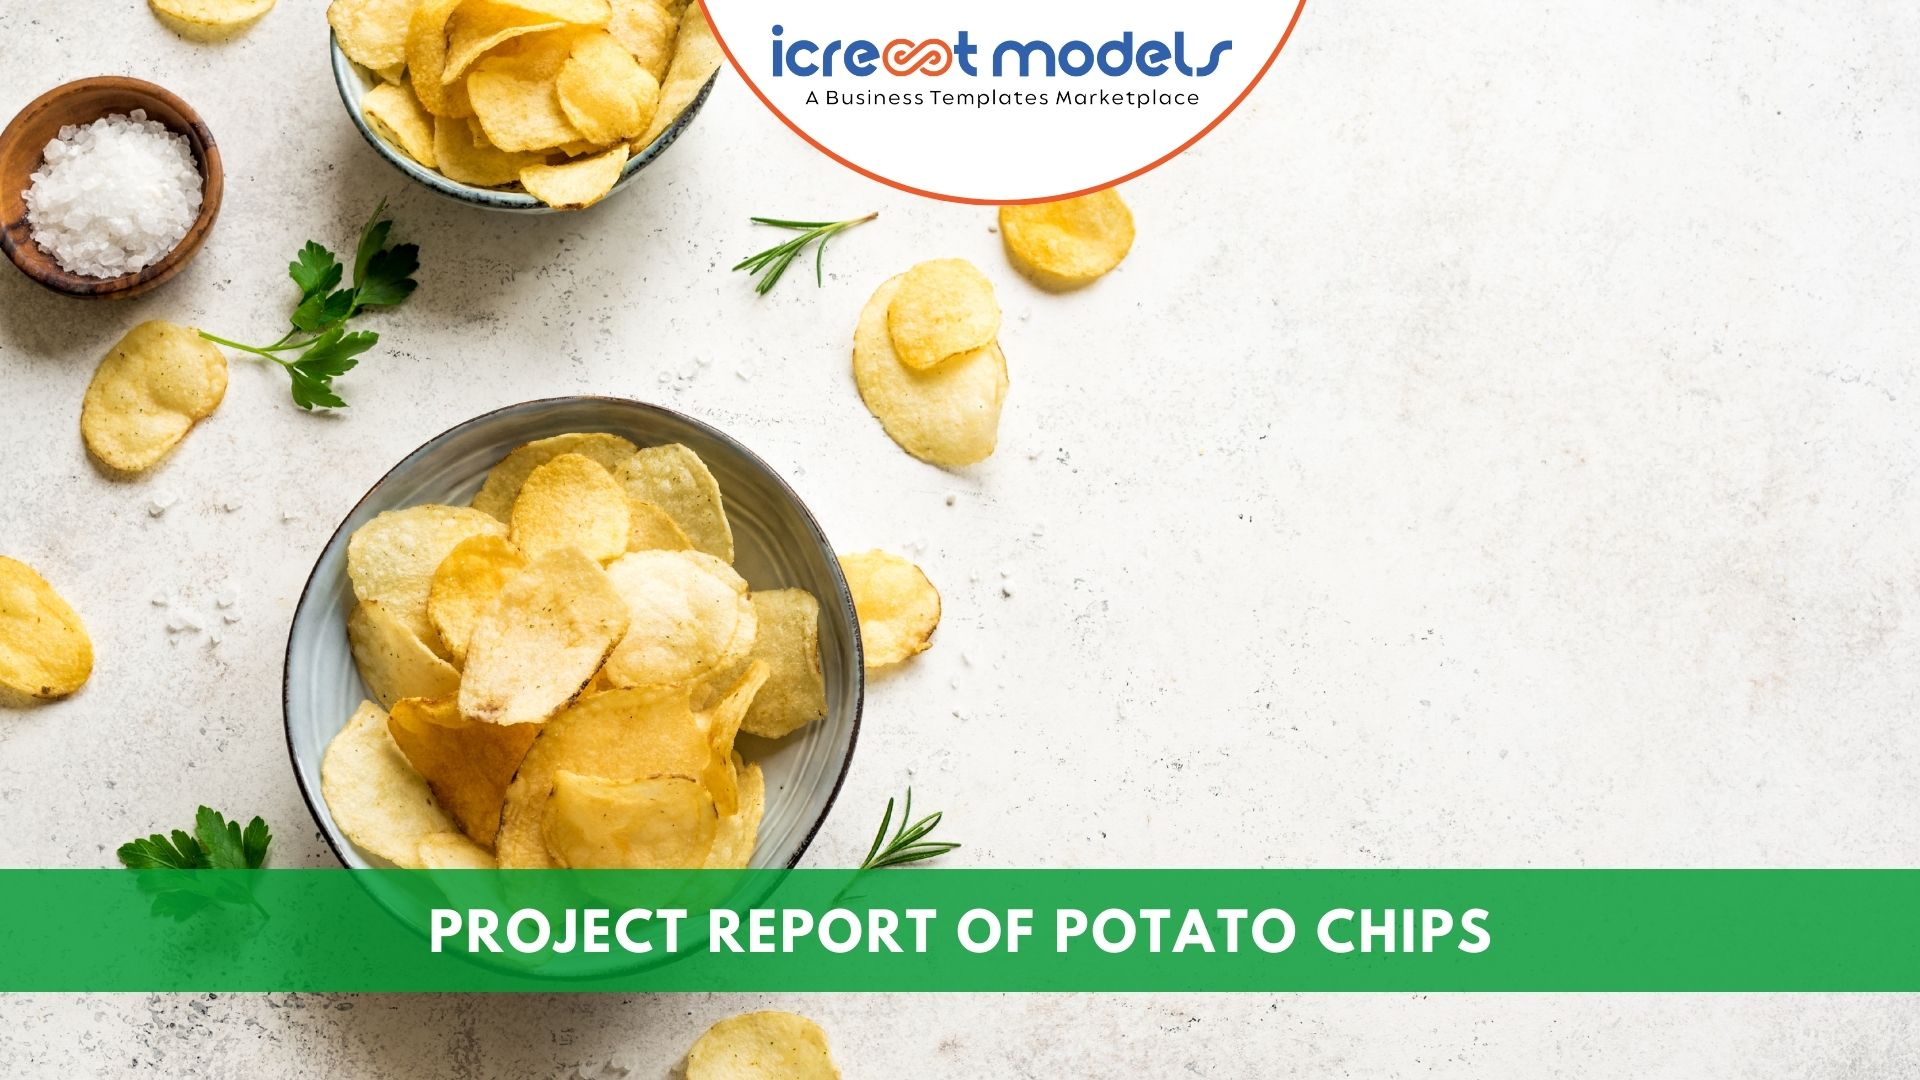 PROJECT REPORT OF POTATO CHIPS